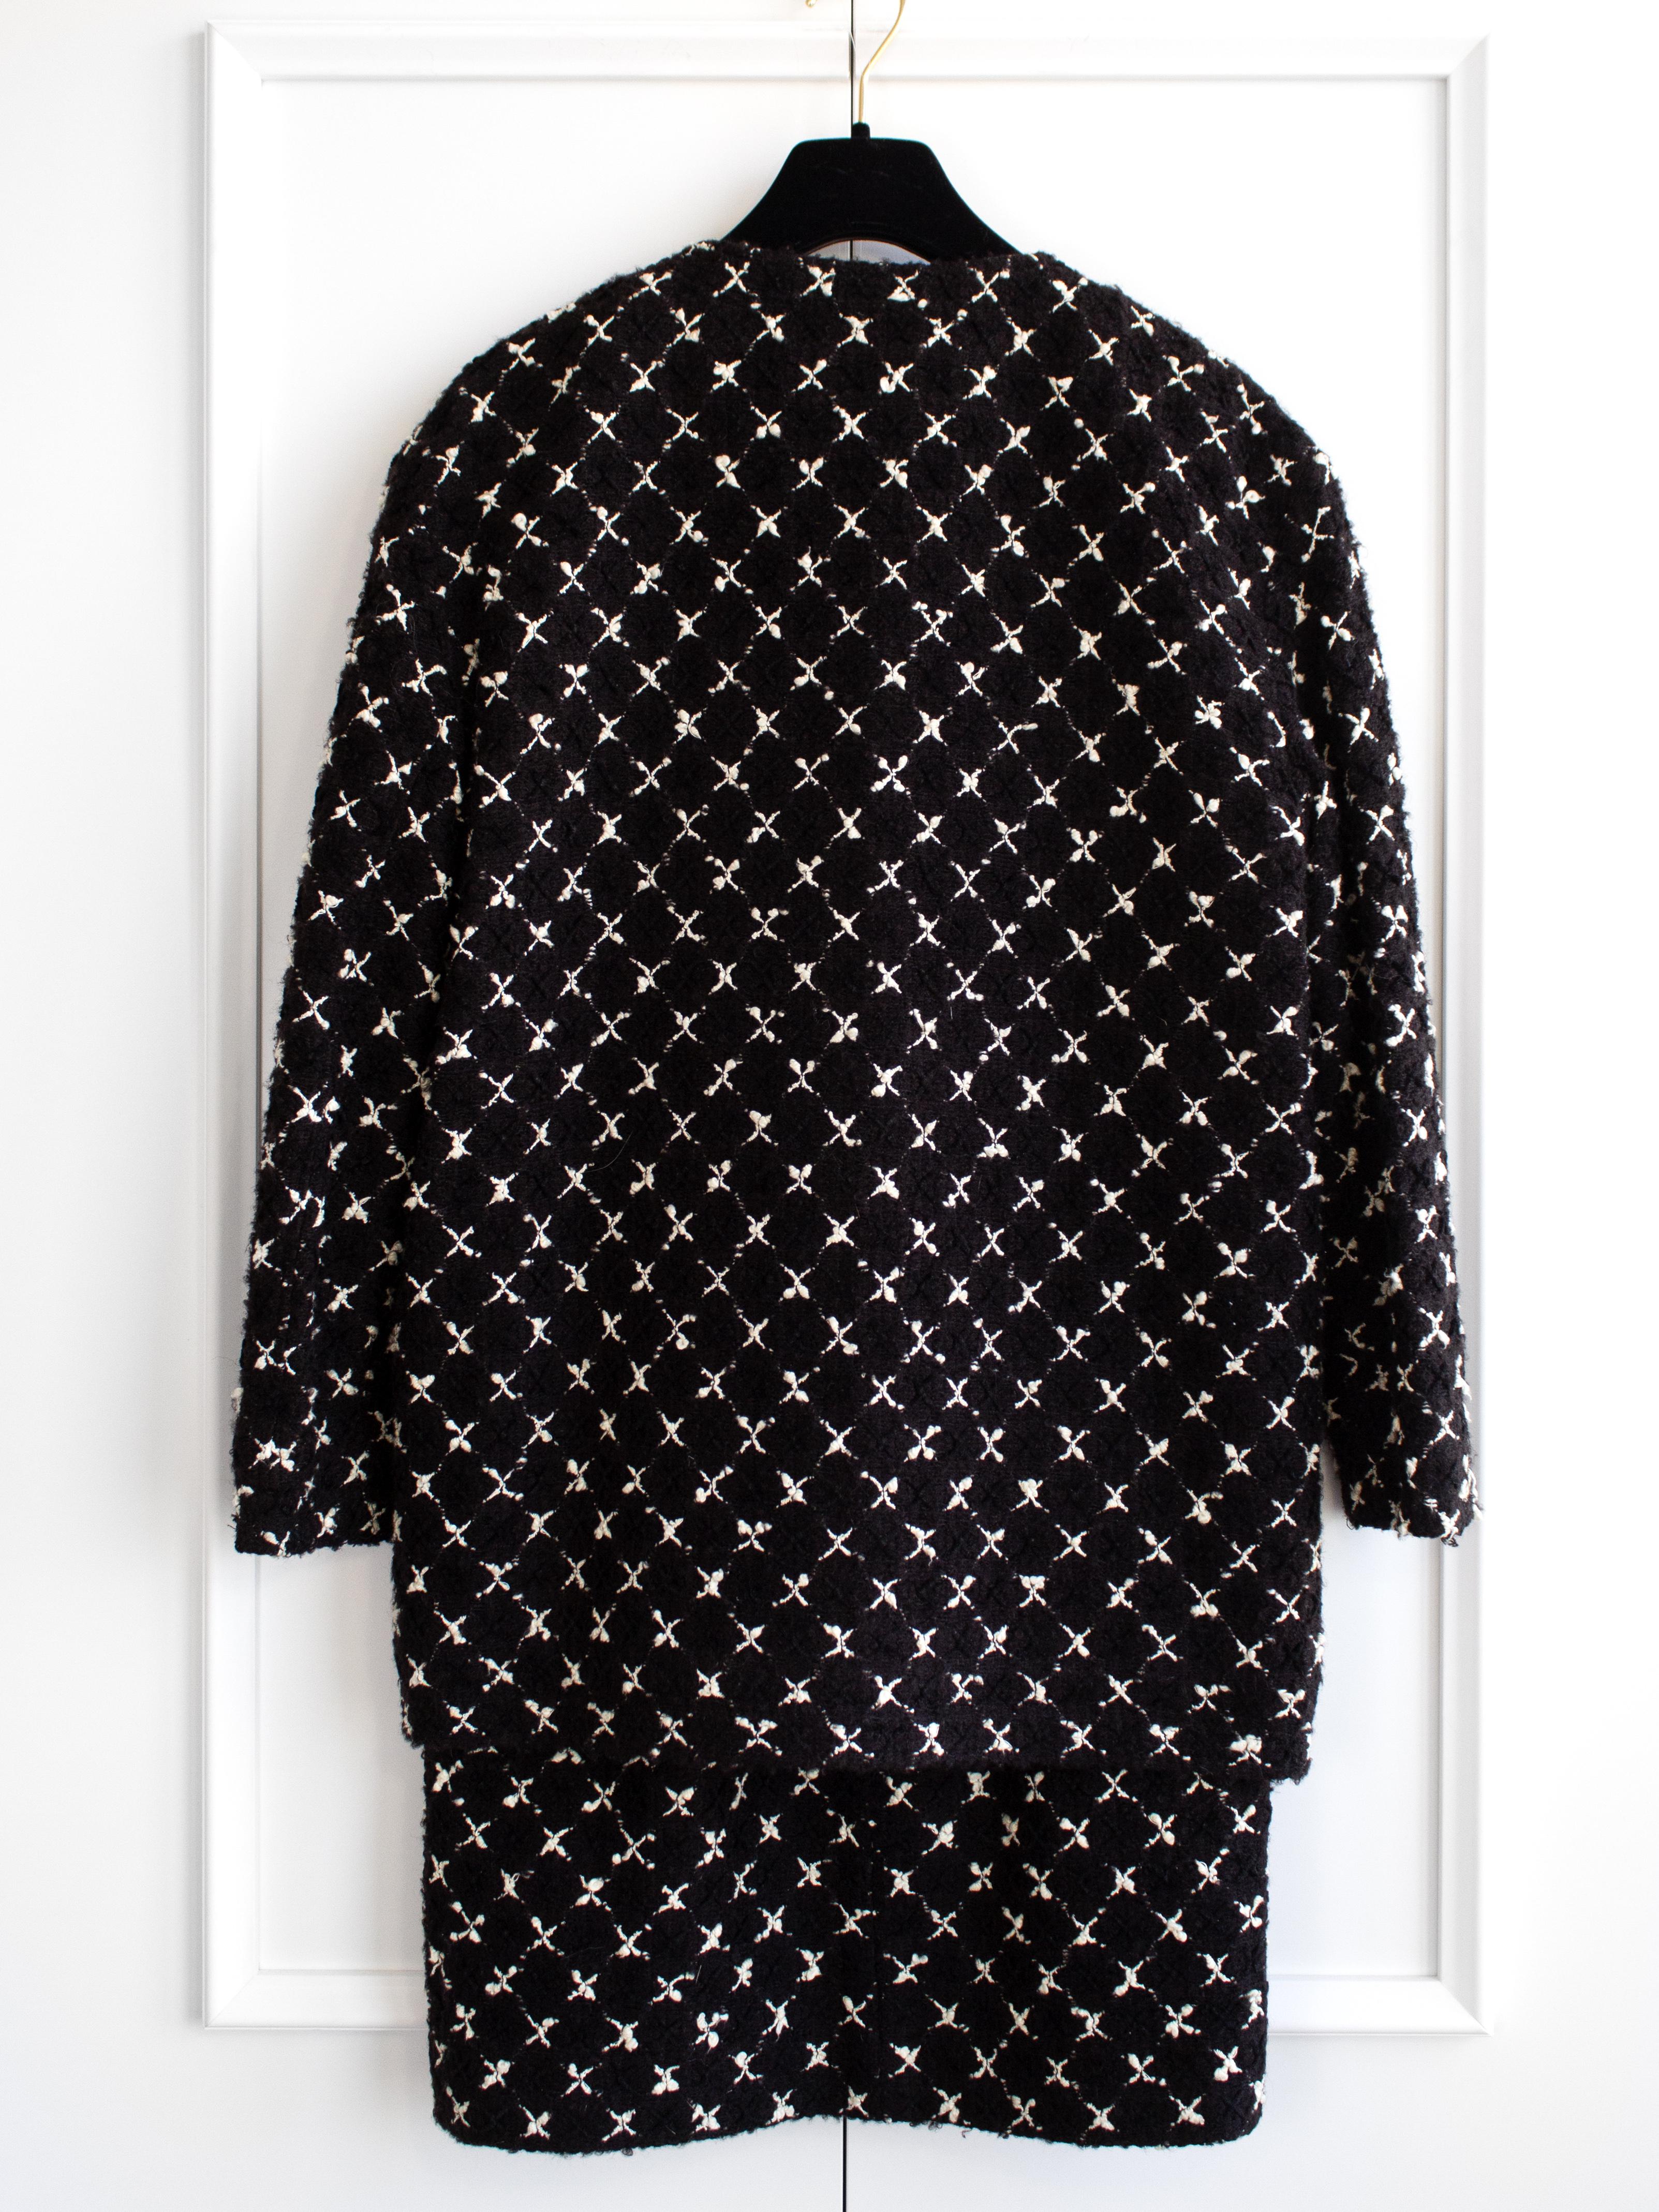 Women's Rare Chanel Vintage F/W 1987 Karl Black White Pearl X Tweed Jacket Skirt Suit For Sale